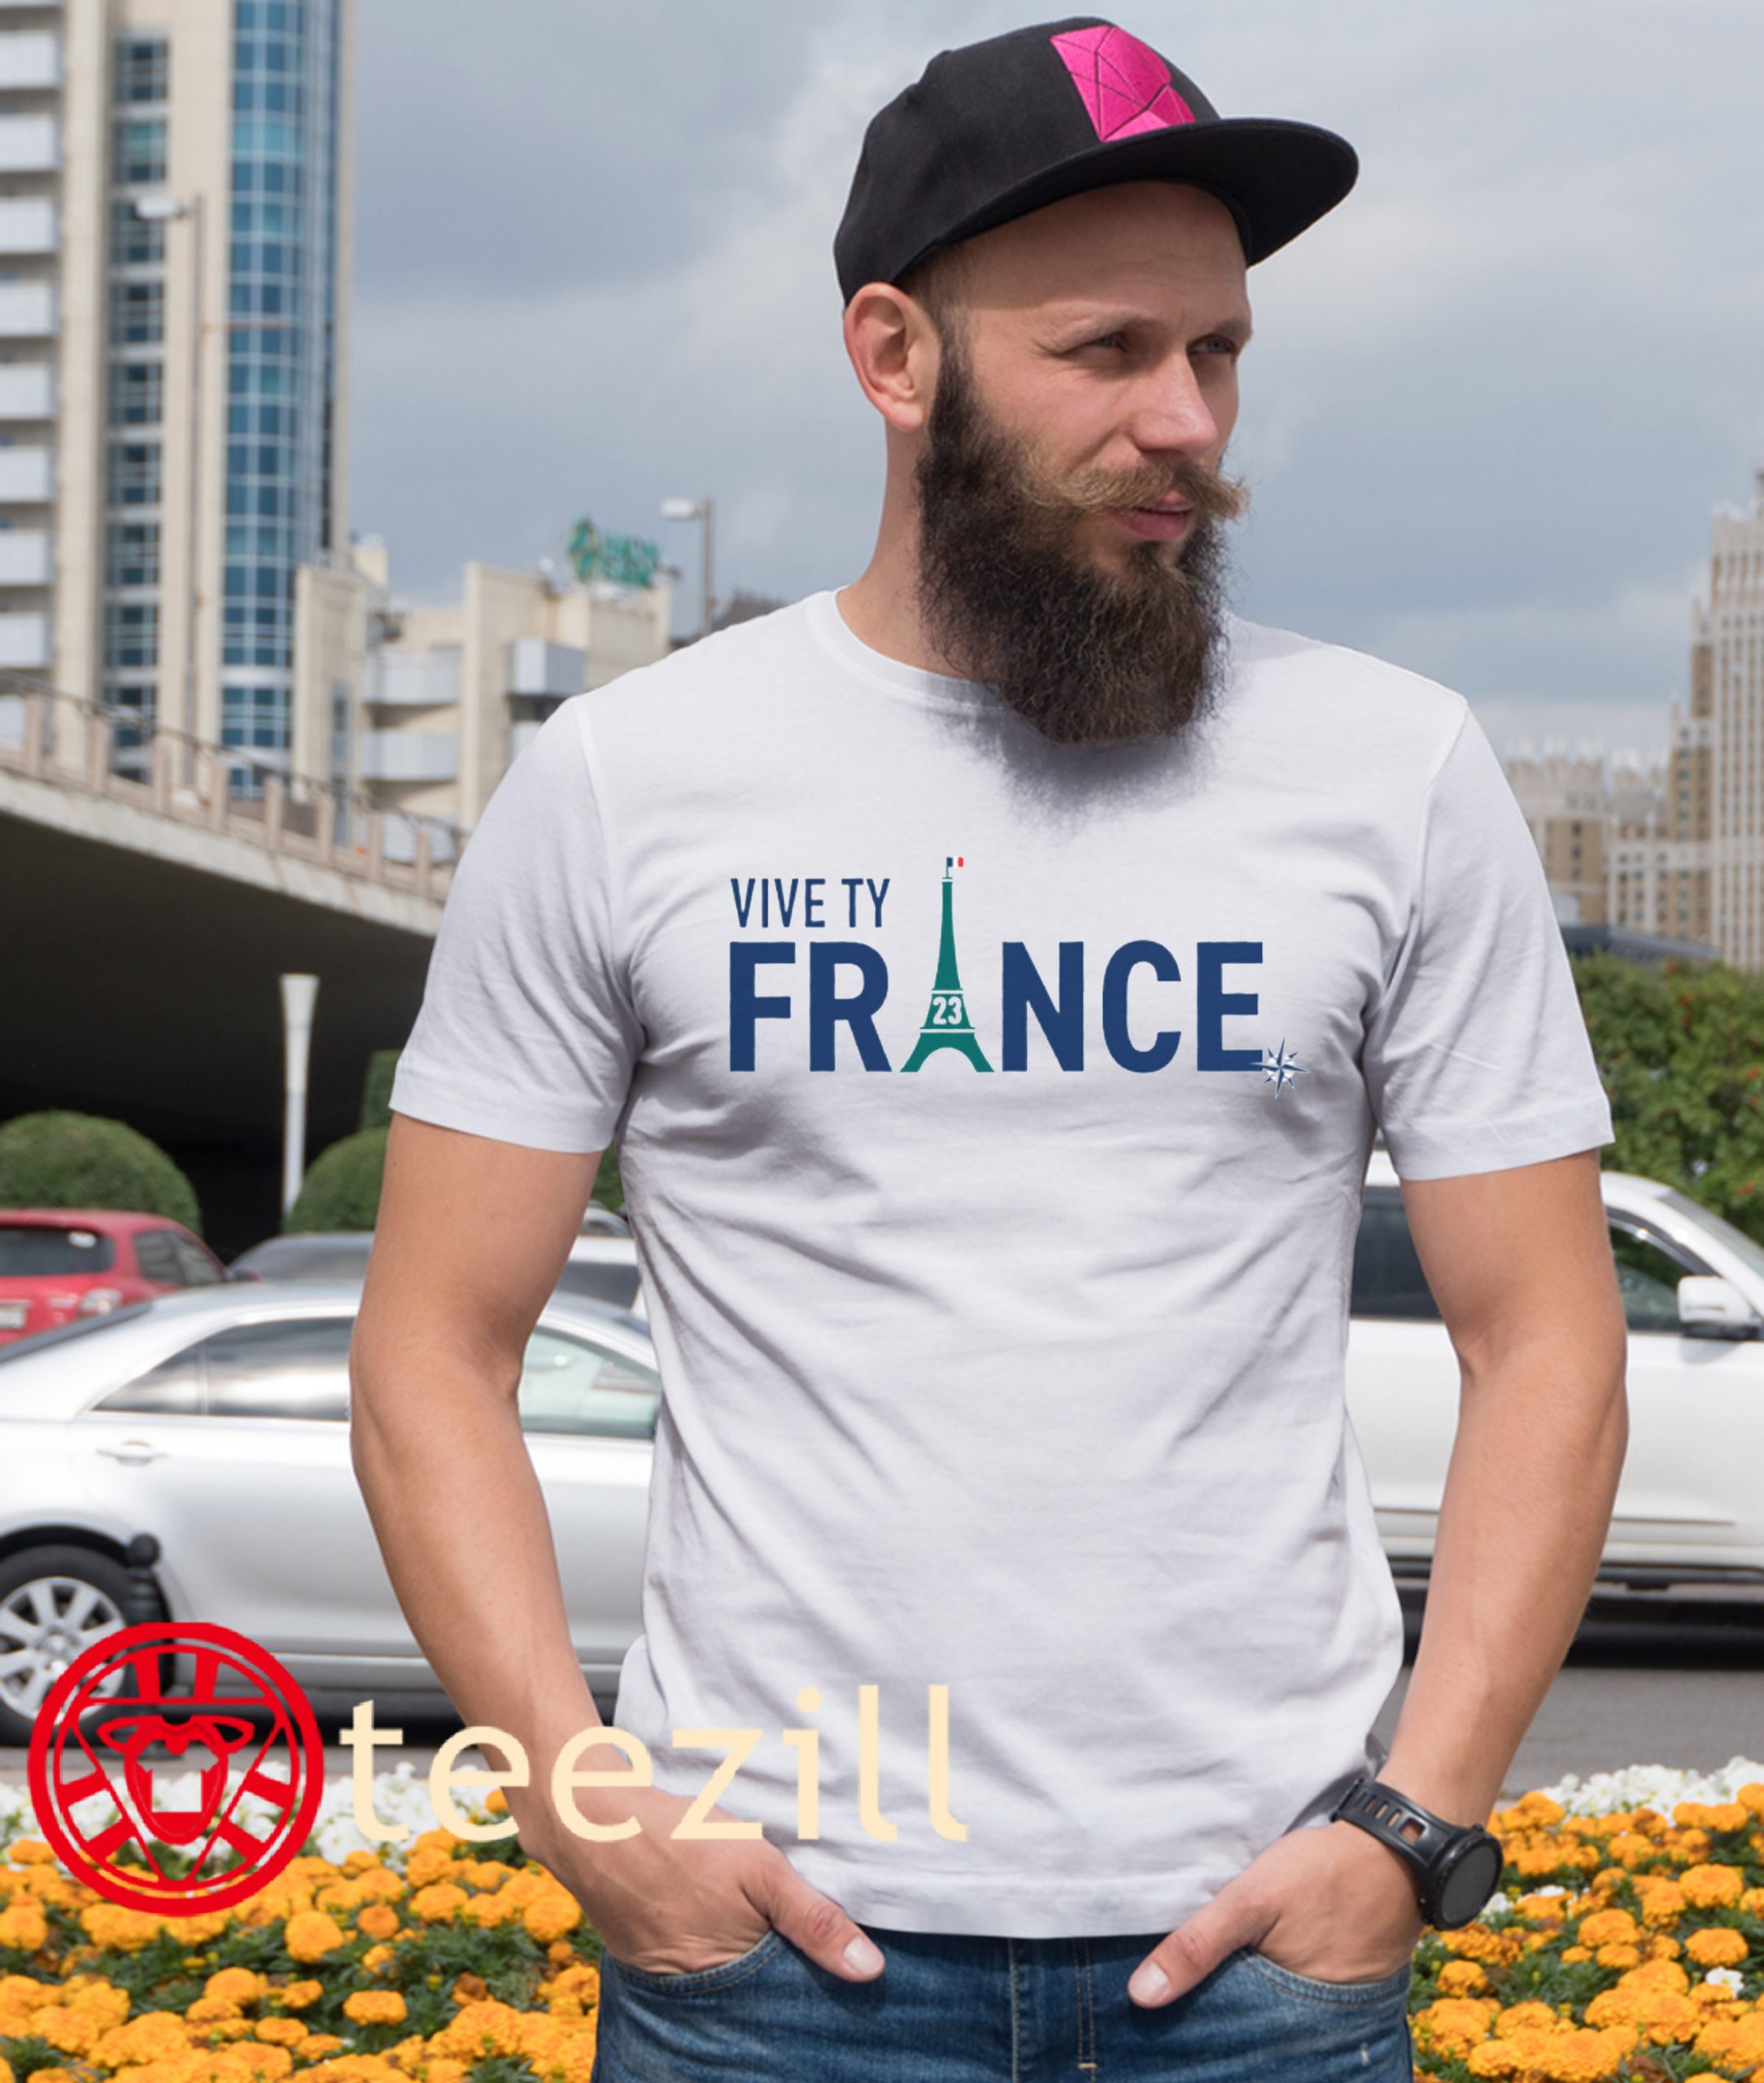 South of France Night - Vive Ty France Shirts - teezill